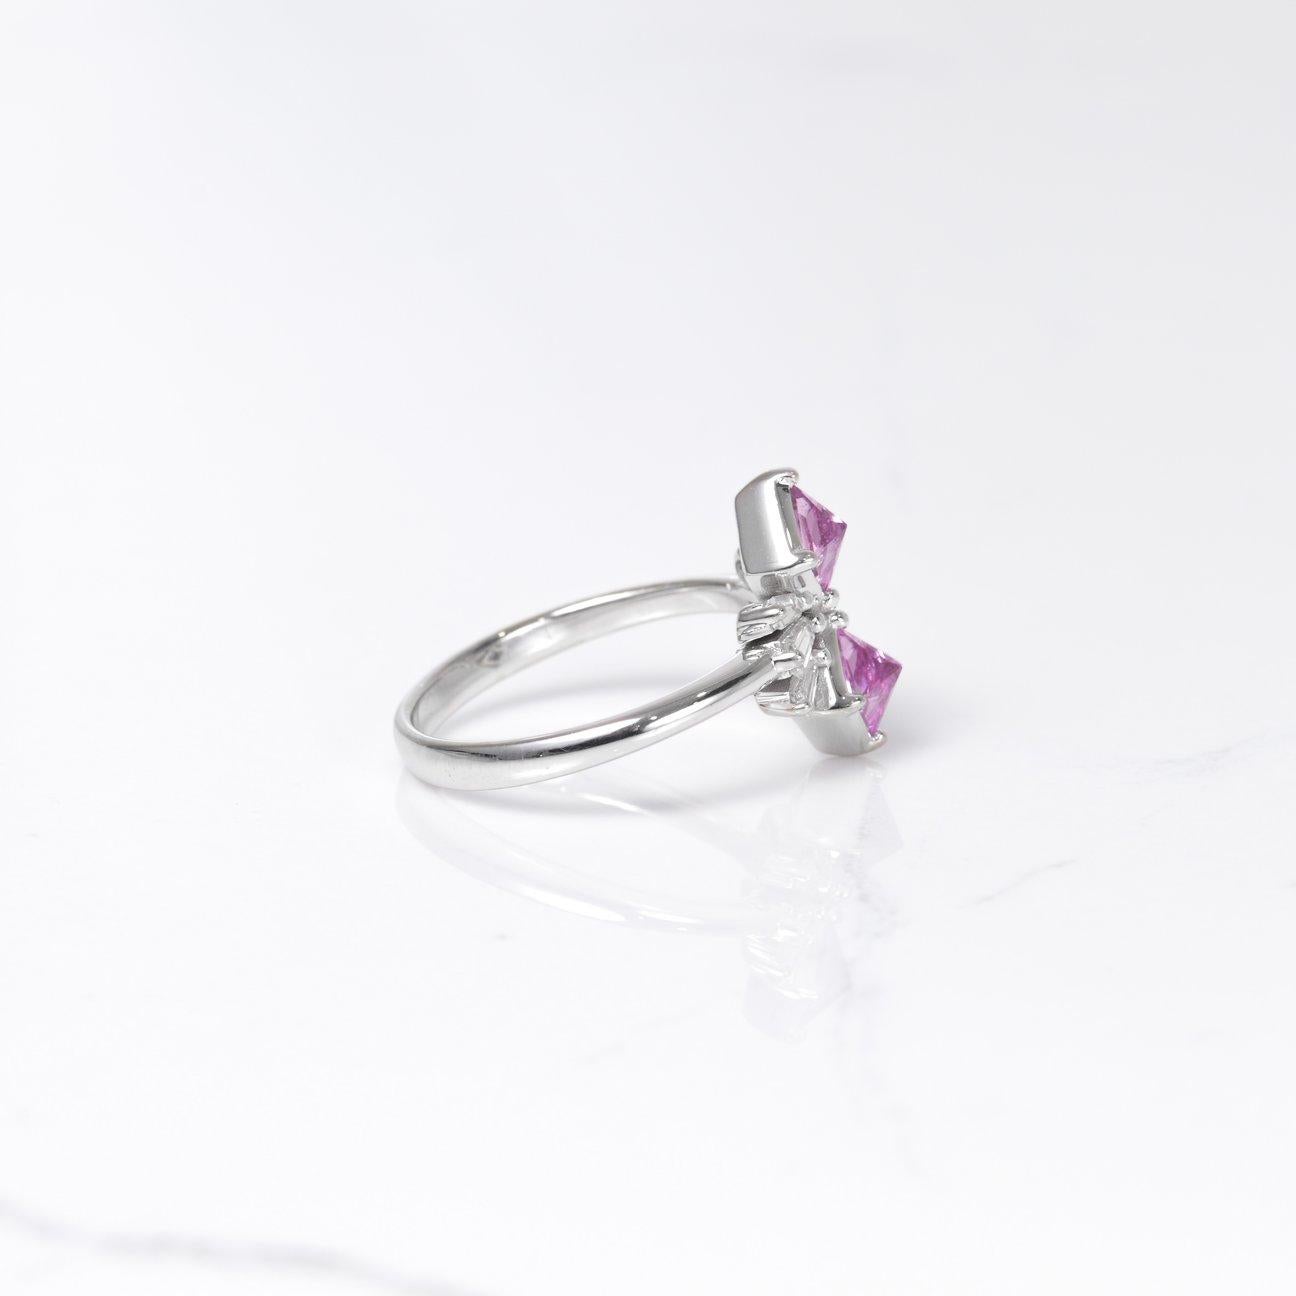 A stunning one of a kind ring! With princess cut pink sapphires set upside down creating such a unique look! These sapphire are a total of 1.03 carats. Accenting these beautiful sapphires are gorgeous diamond baguettes that total .36 carats. All set